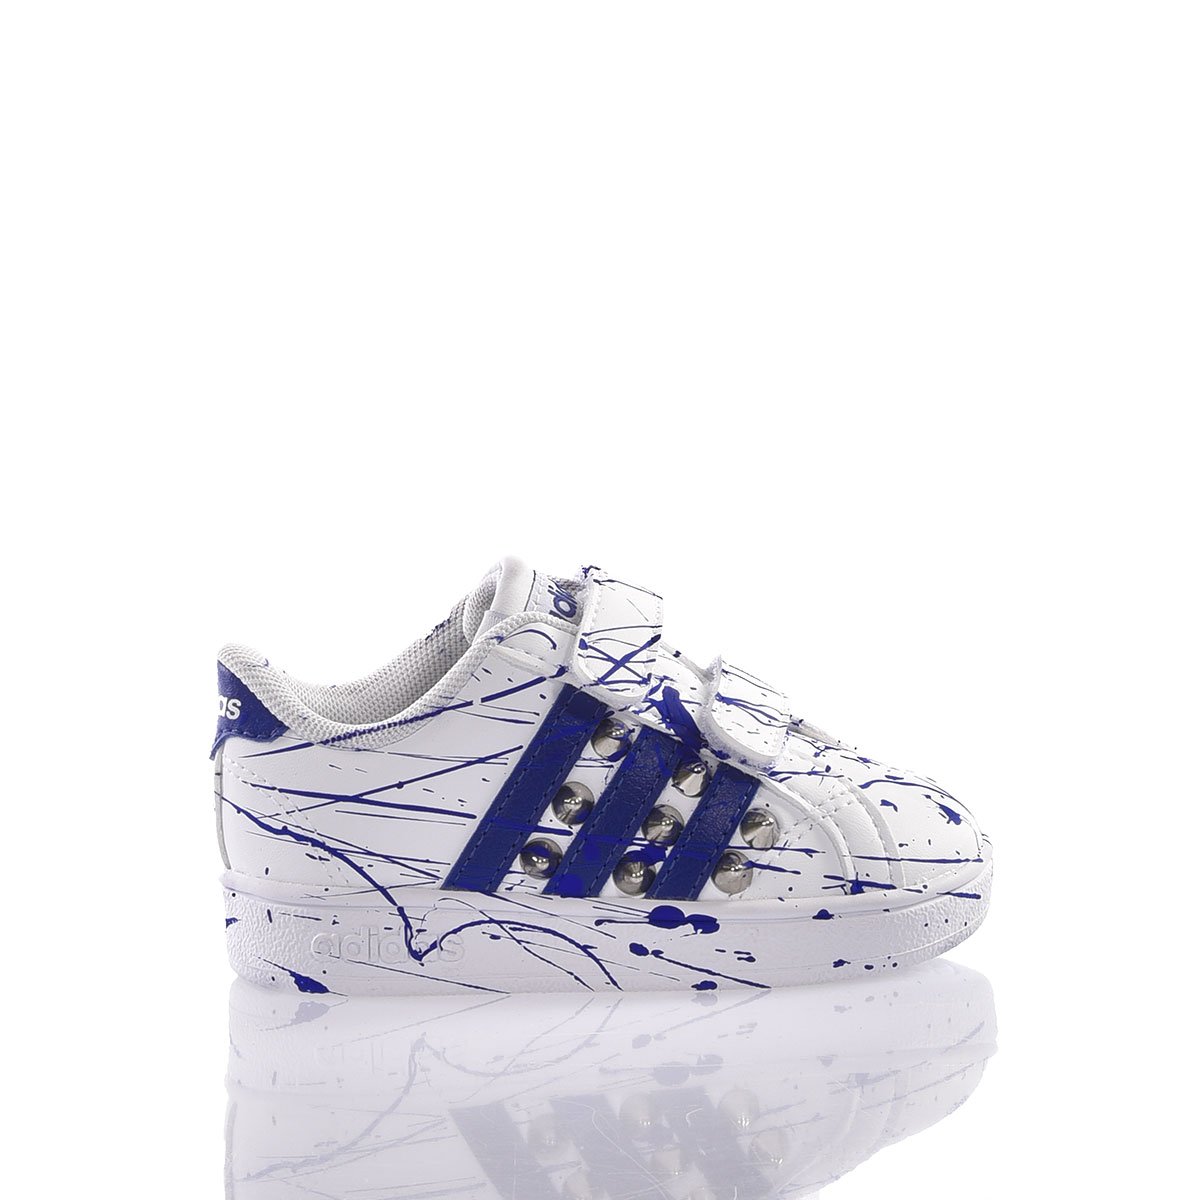 ADIDAS BABY ROYAL PAINT  Studs, Special